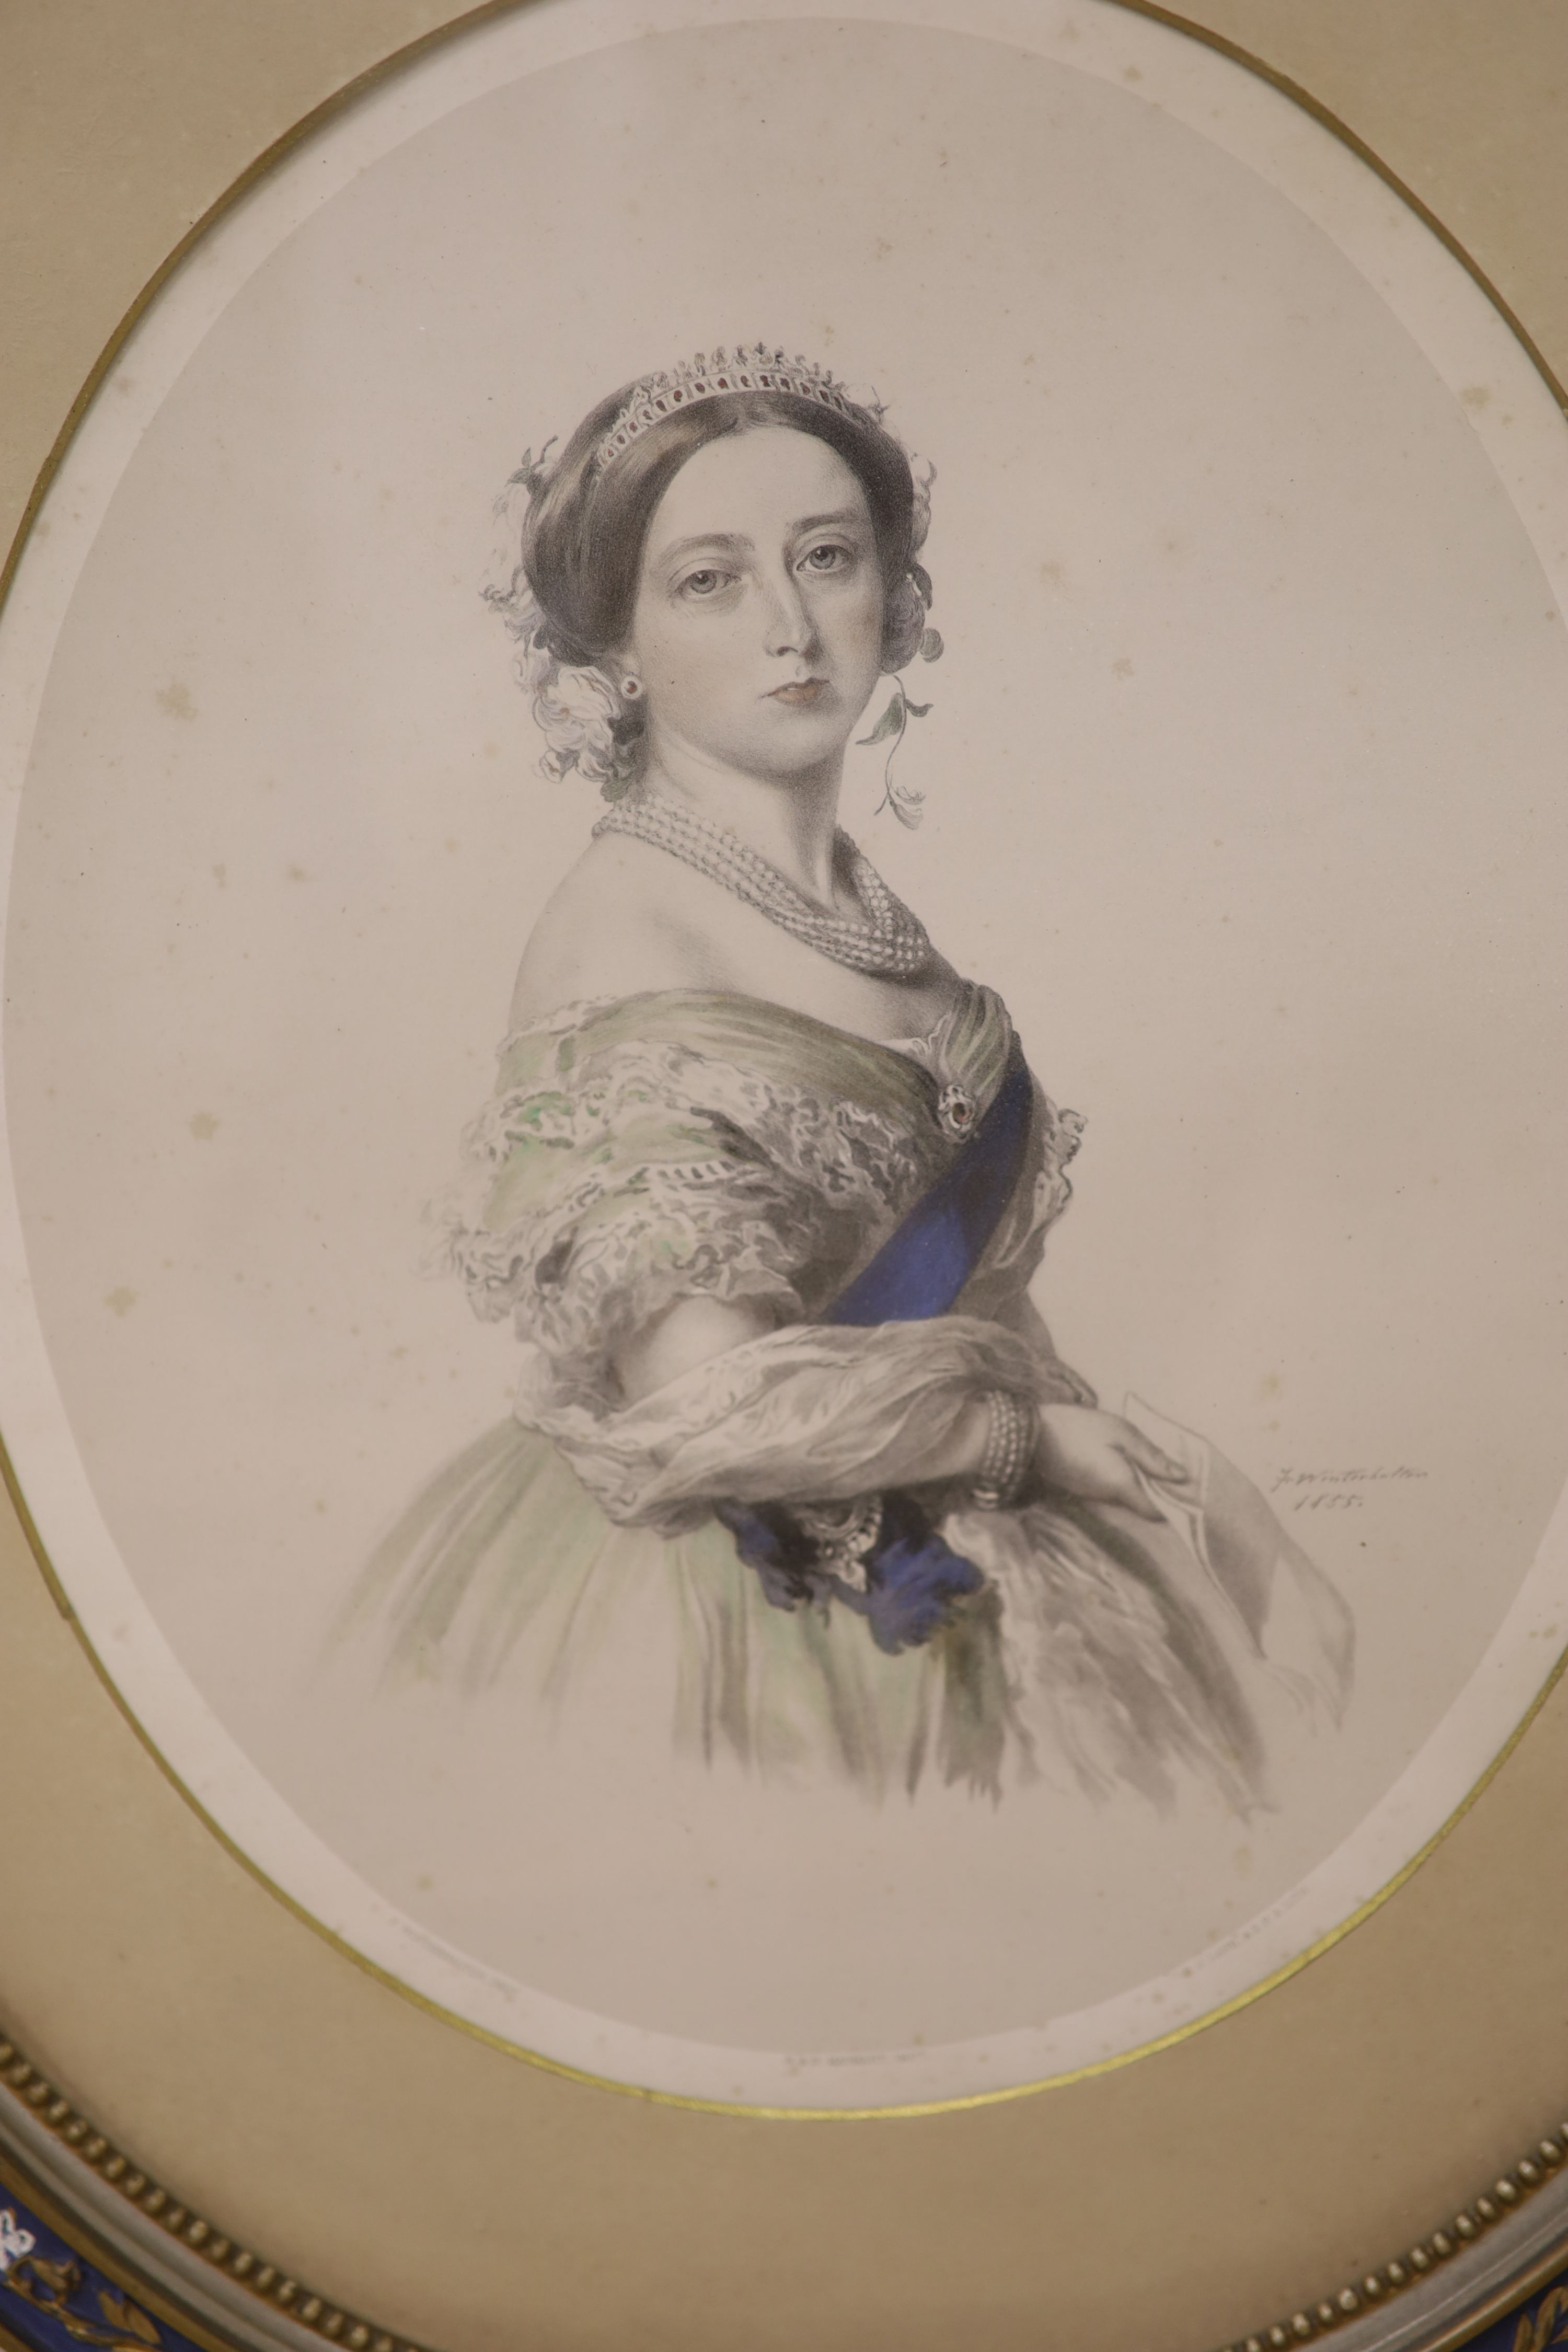 After Winterhalter, coloured lithograph, Portrait of Queen Victoria 1855, 39 x 31cm, and a pair of engravings, The Afright and The R